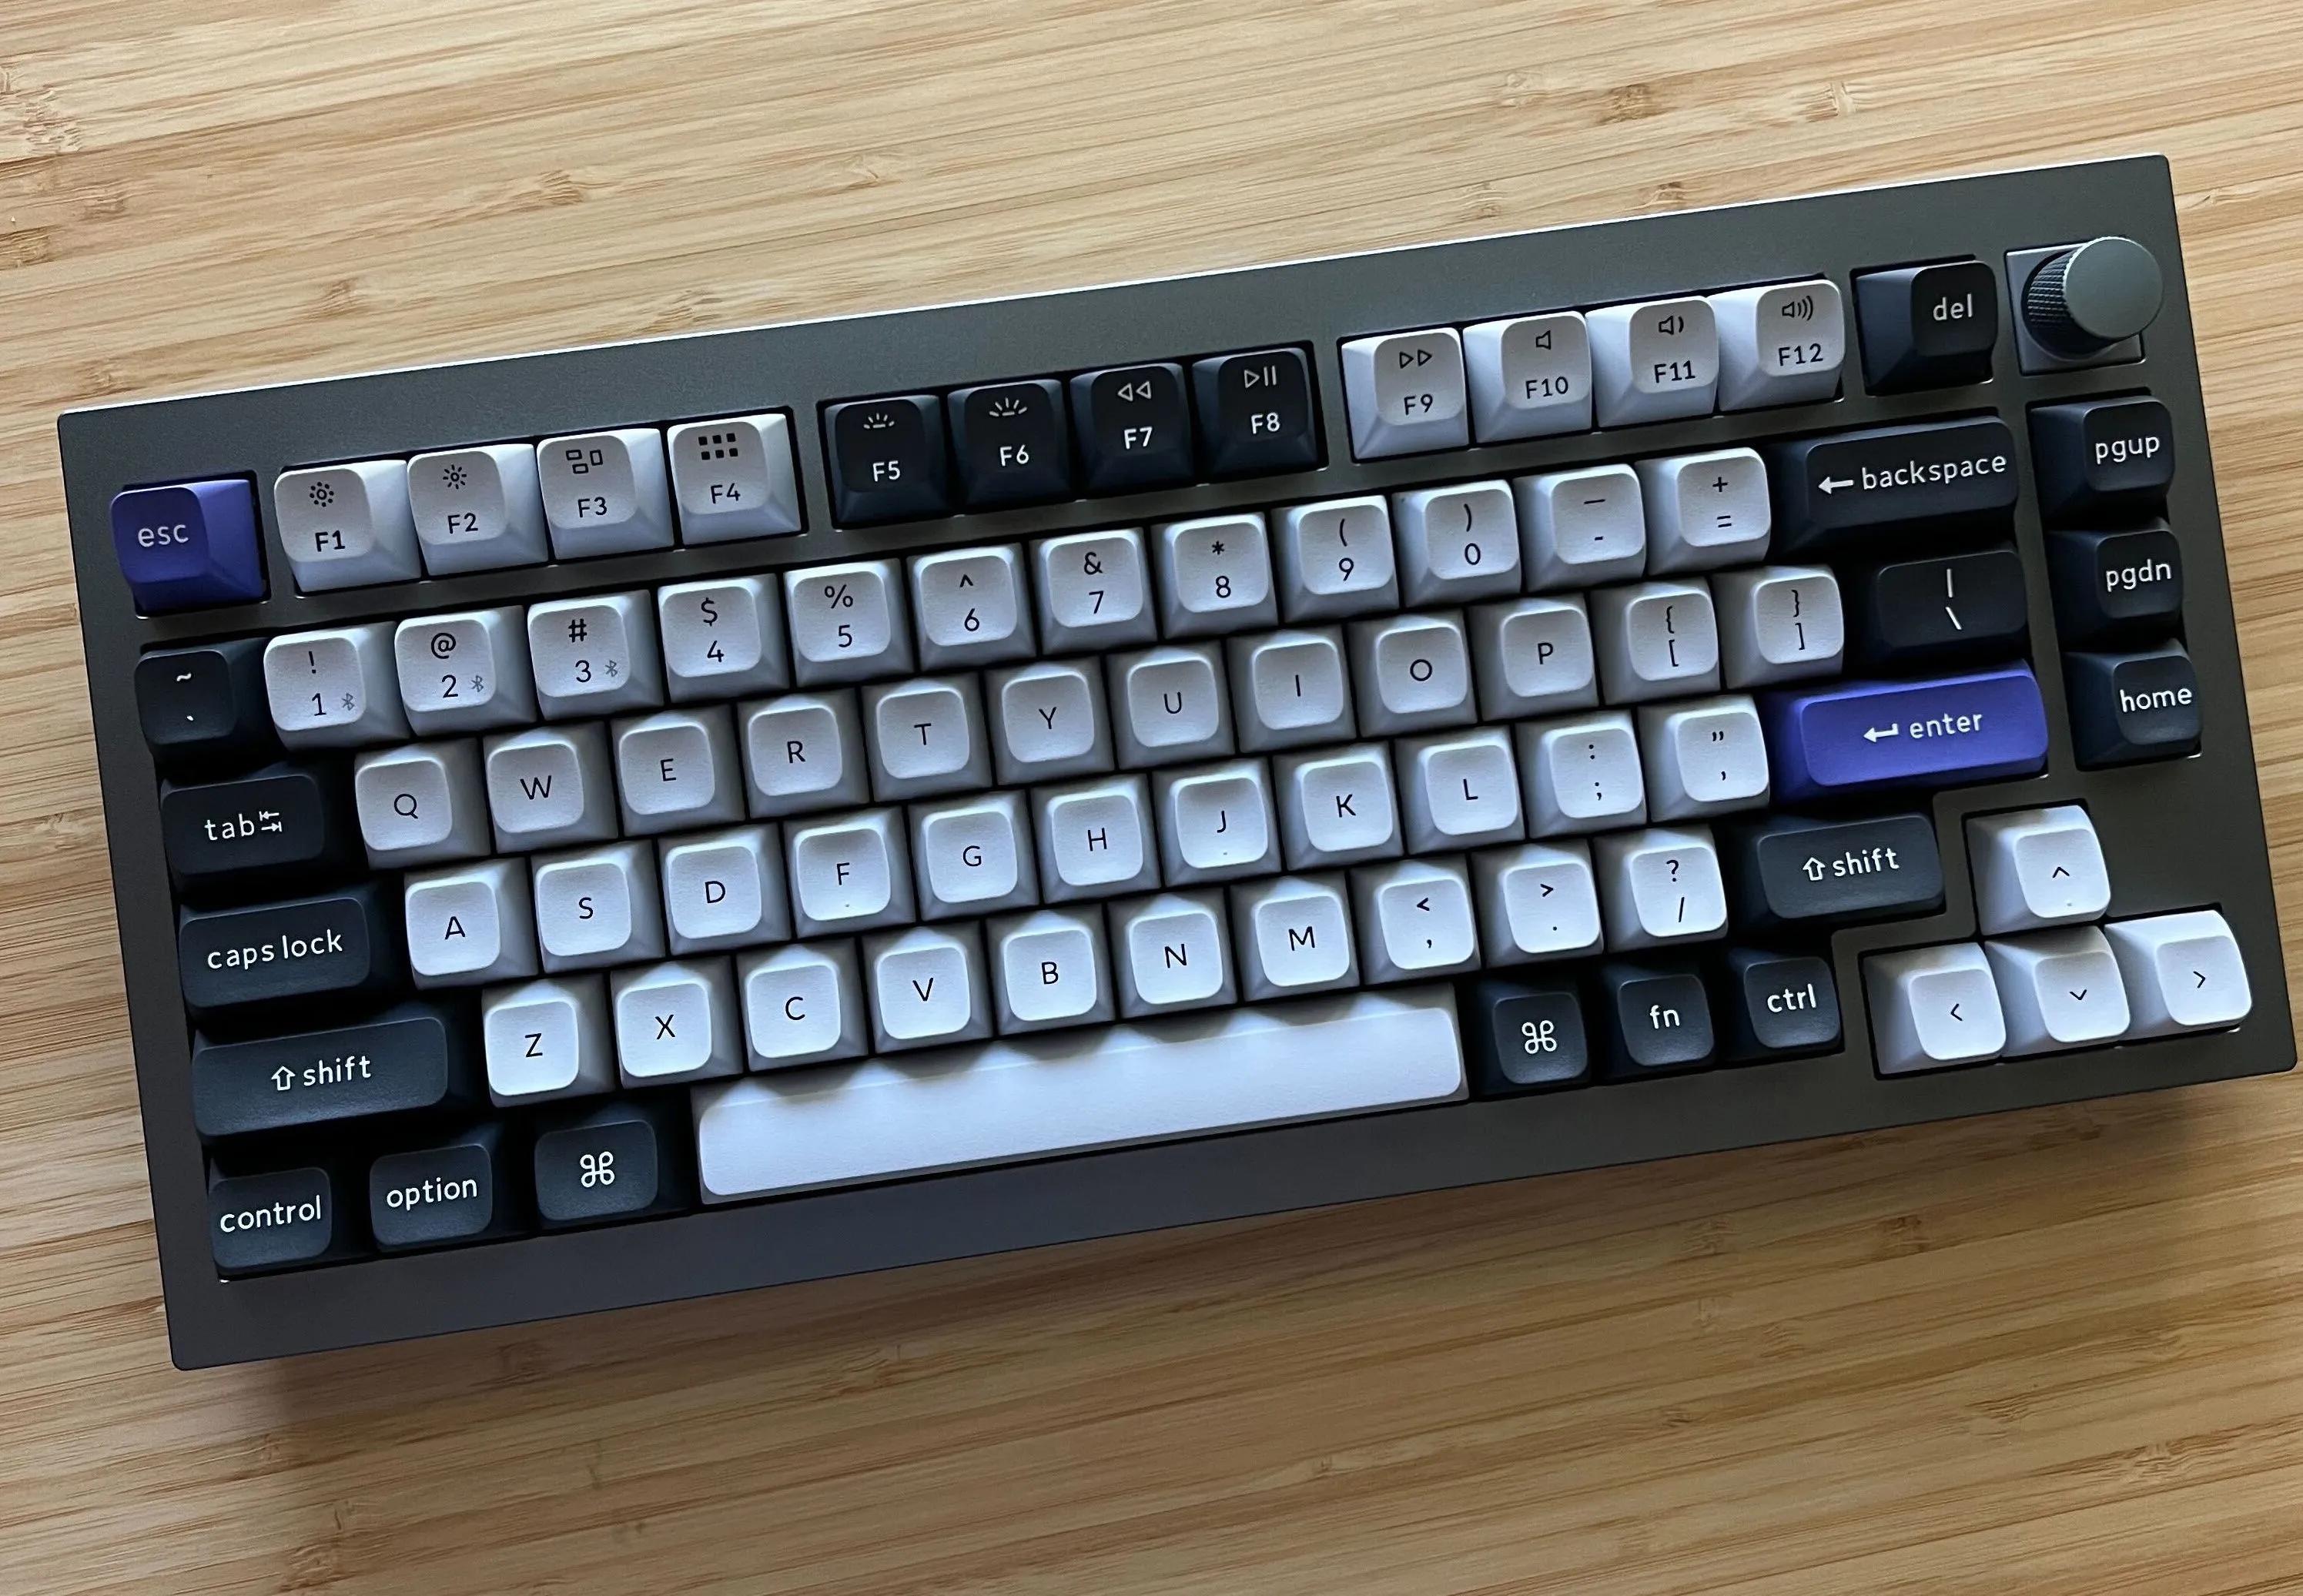 What is your opinion of mechanical keyboards and why?